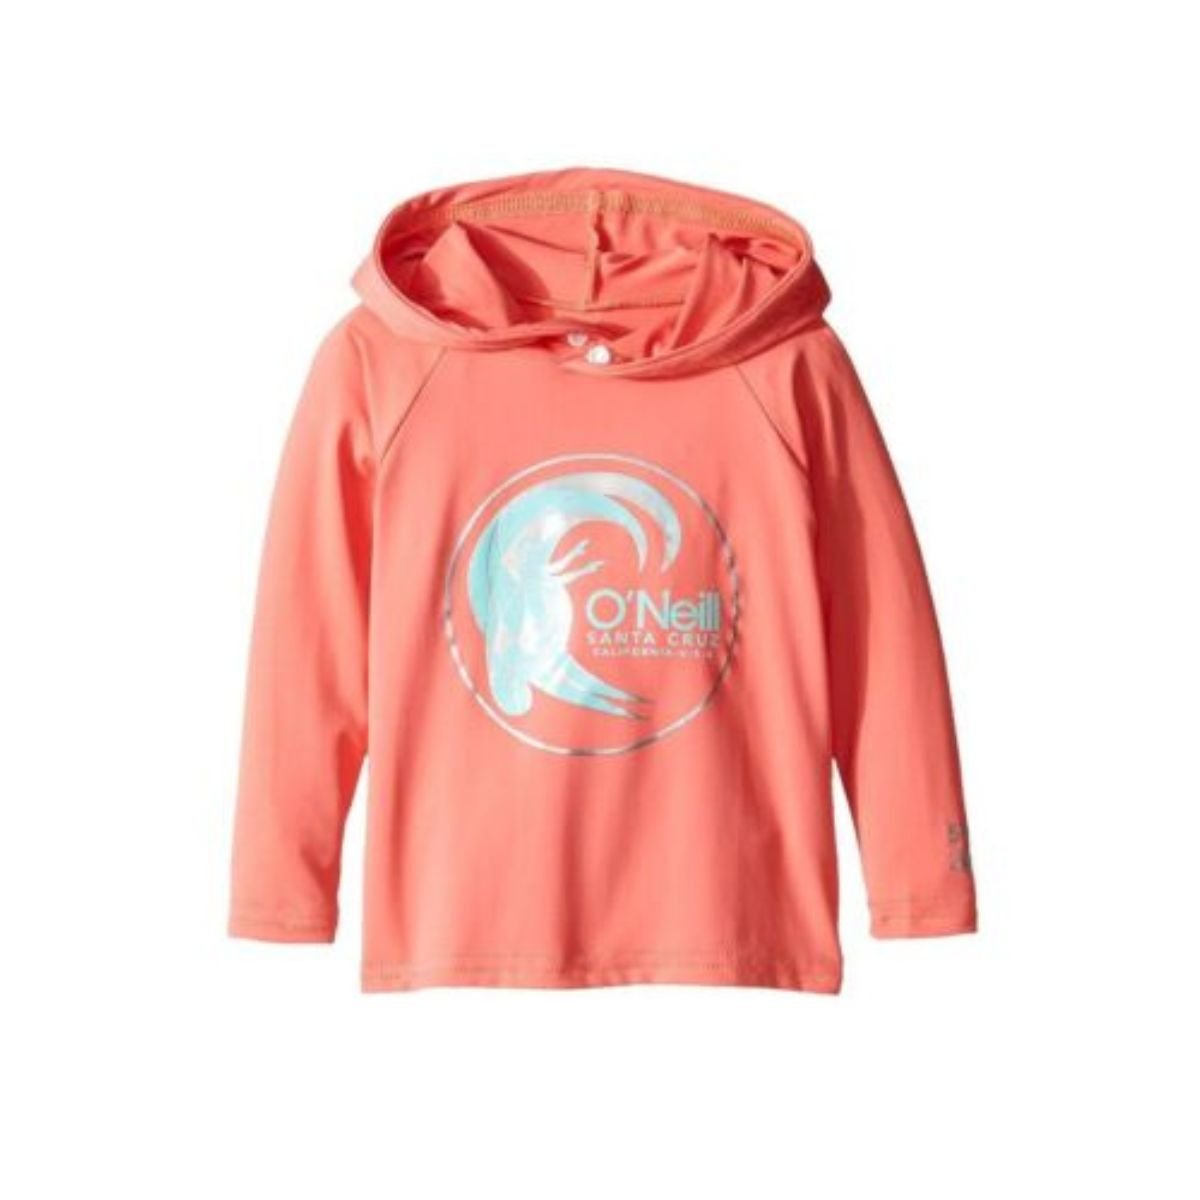 O'Neill Girl's Toddler Skins Hoodie in Coral 2017 - BoardCo